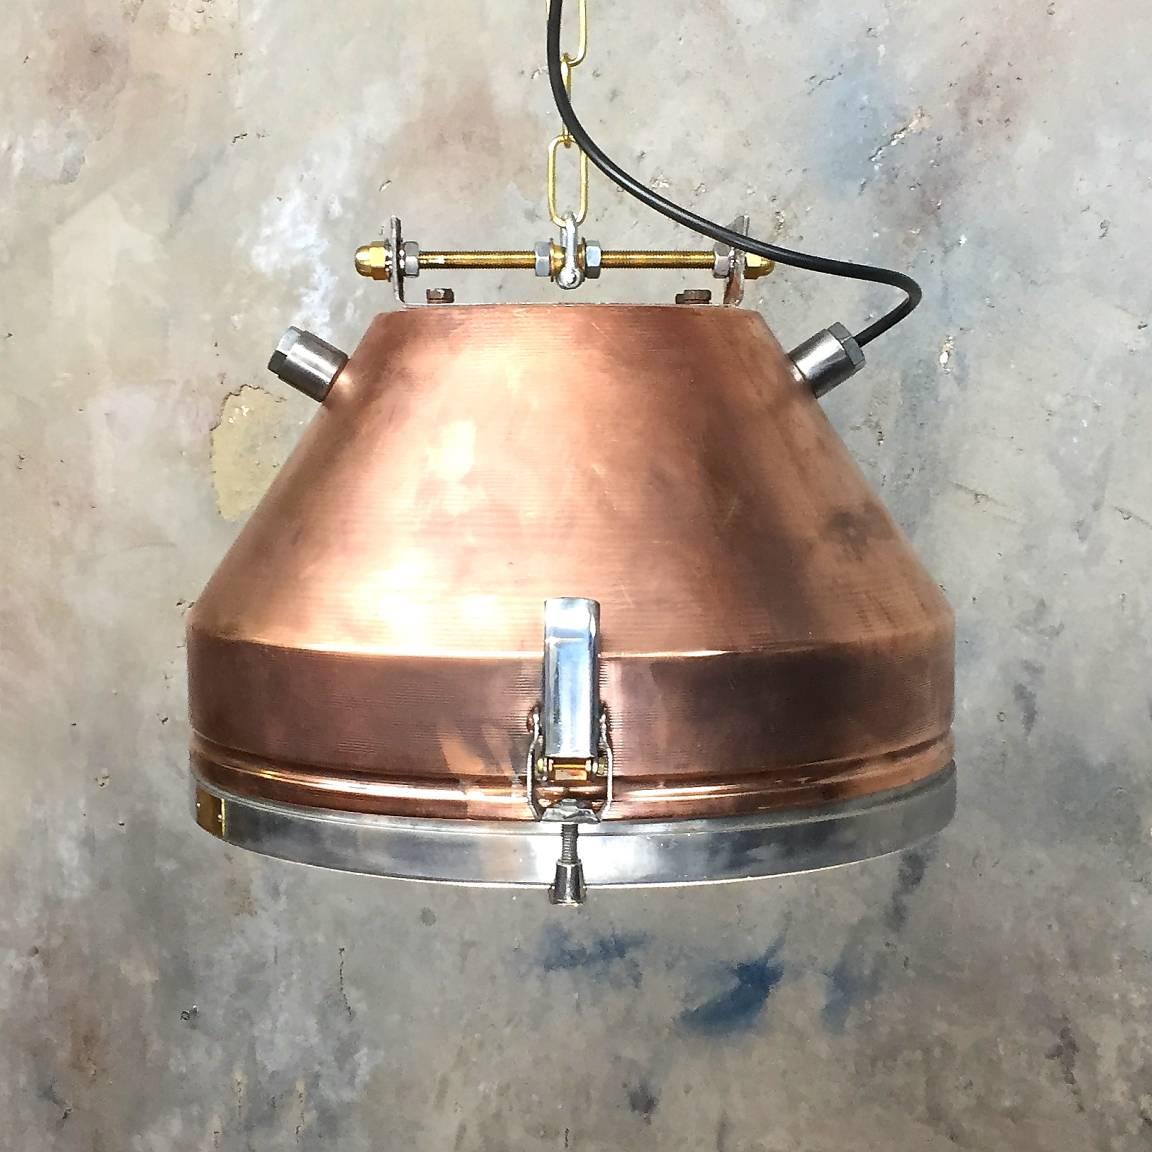 VEB copper and aluminium pendant with target grill.

VEB was formed in the early 1950s and was the biggest Luminaire manufacturer in the GDR.
 
The publicly owned operation (German: Volkseigener Betrieb; abbreviated VEB) was the main legal form